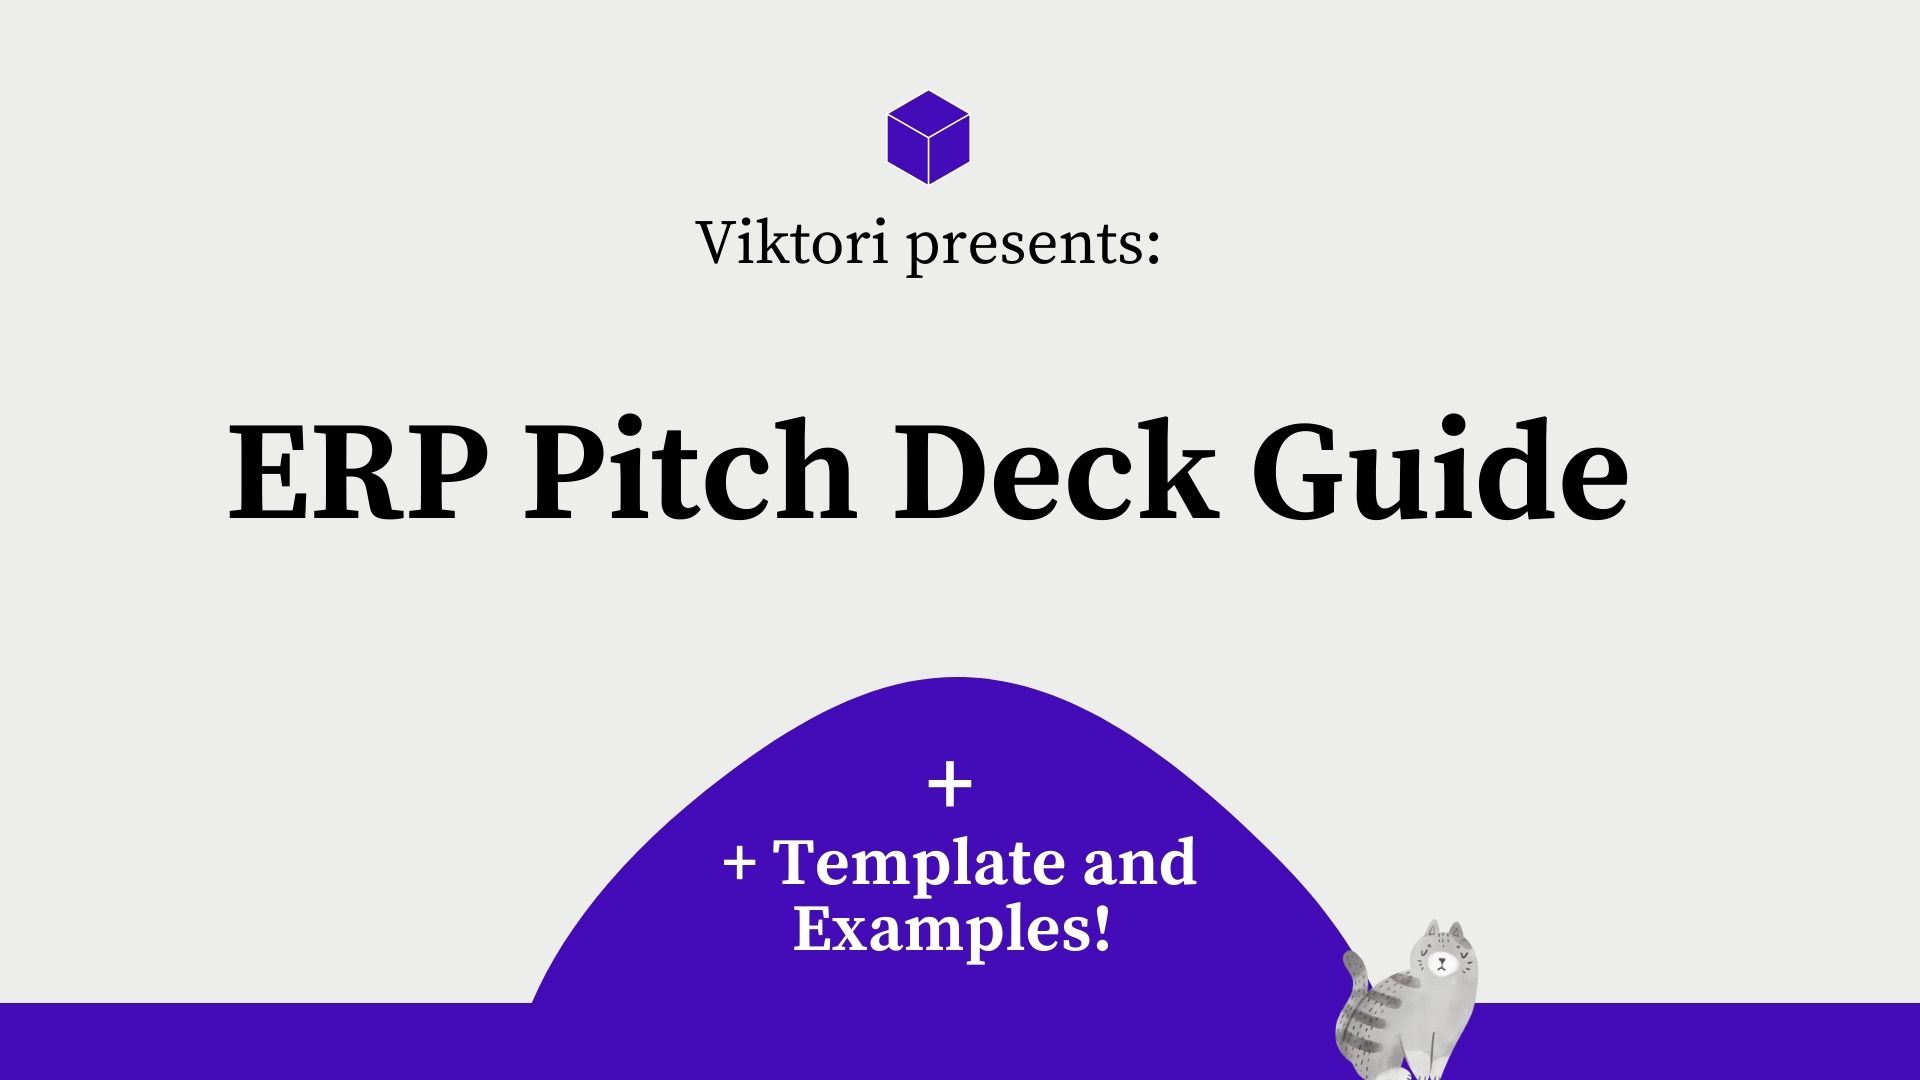 ERP pitch deck guide